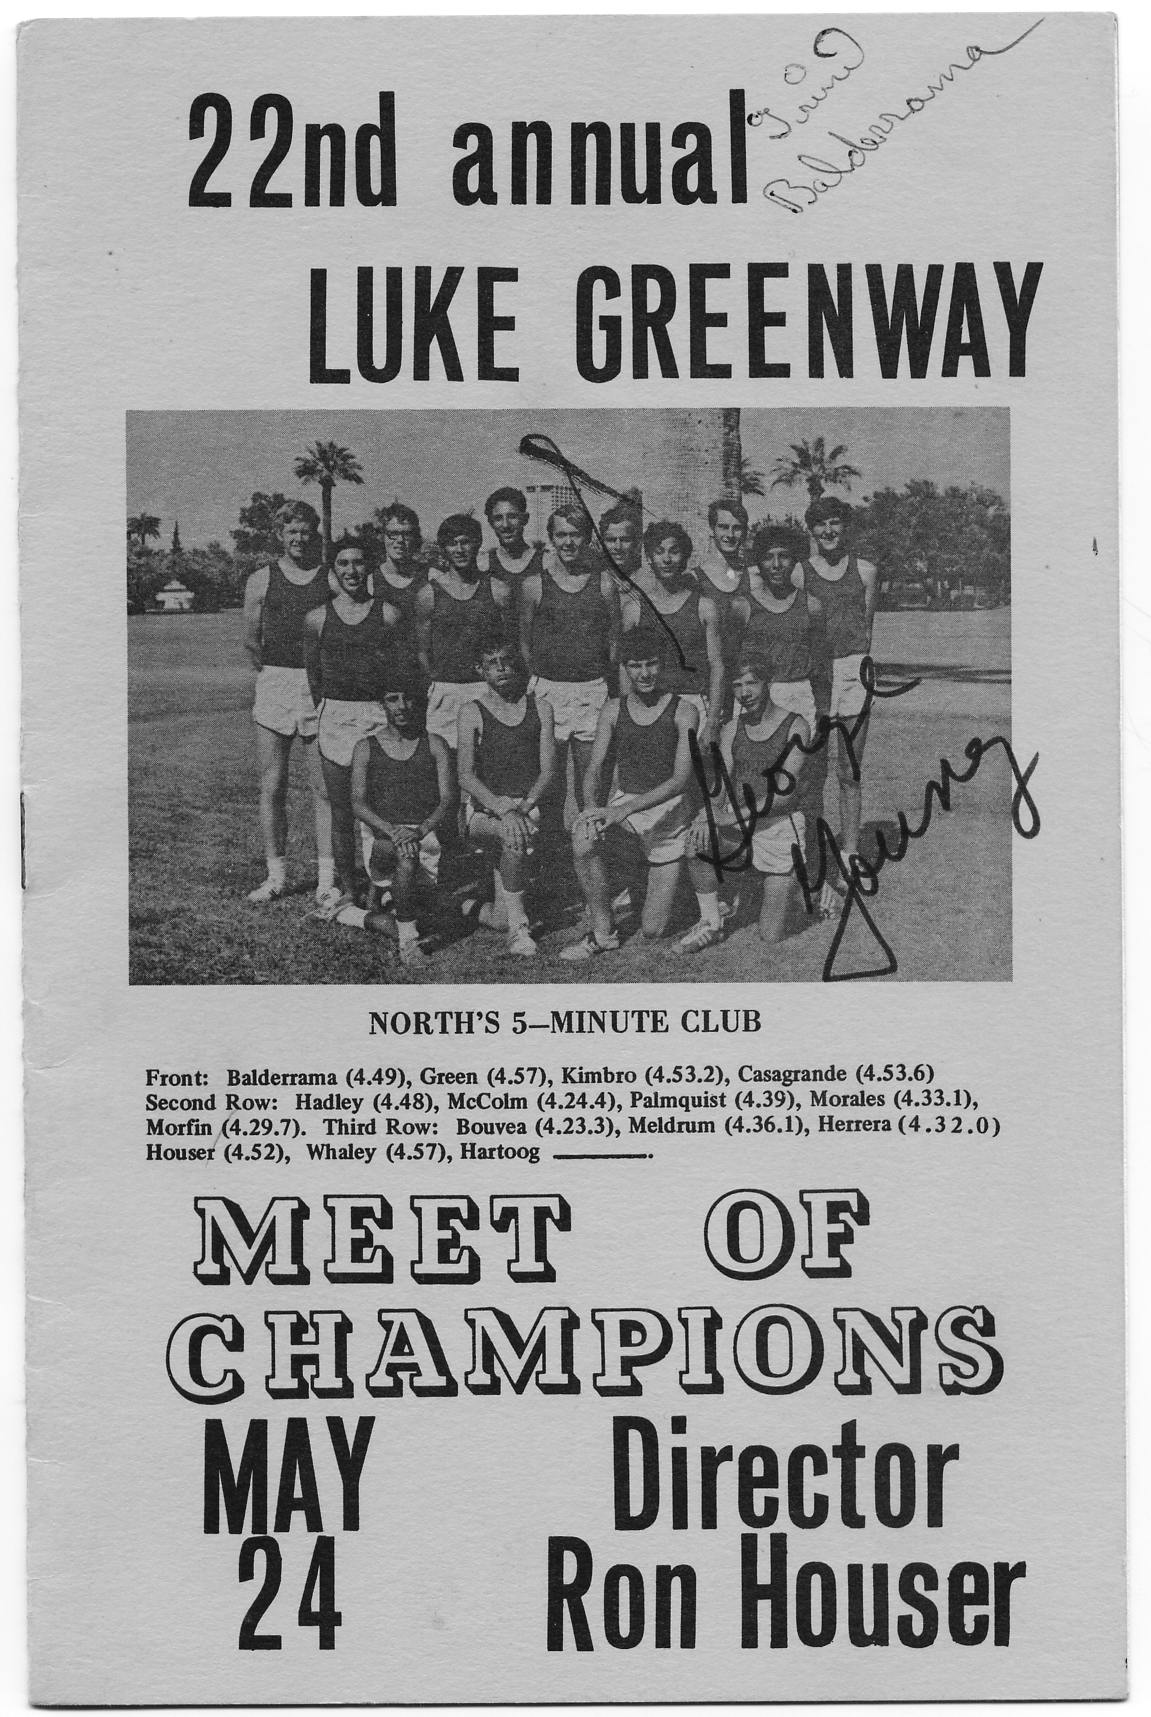 The cover of the bulletin for the annual Luke Greenway Track Meet, featuring the North High 5-minute mile club members, and signature by teammate Trini Balderrama and USA Olympic Team Member George Young.